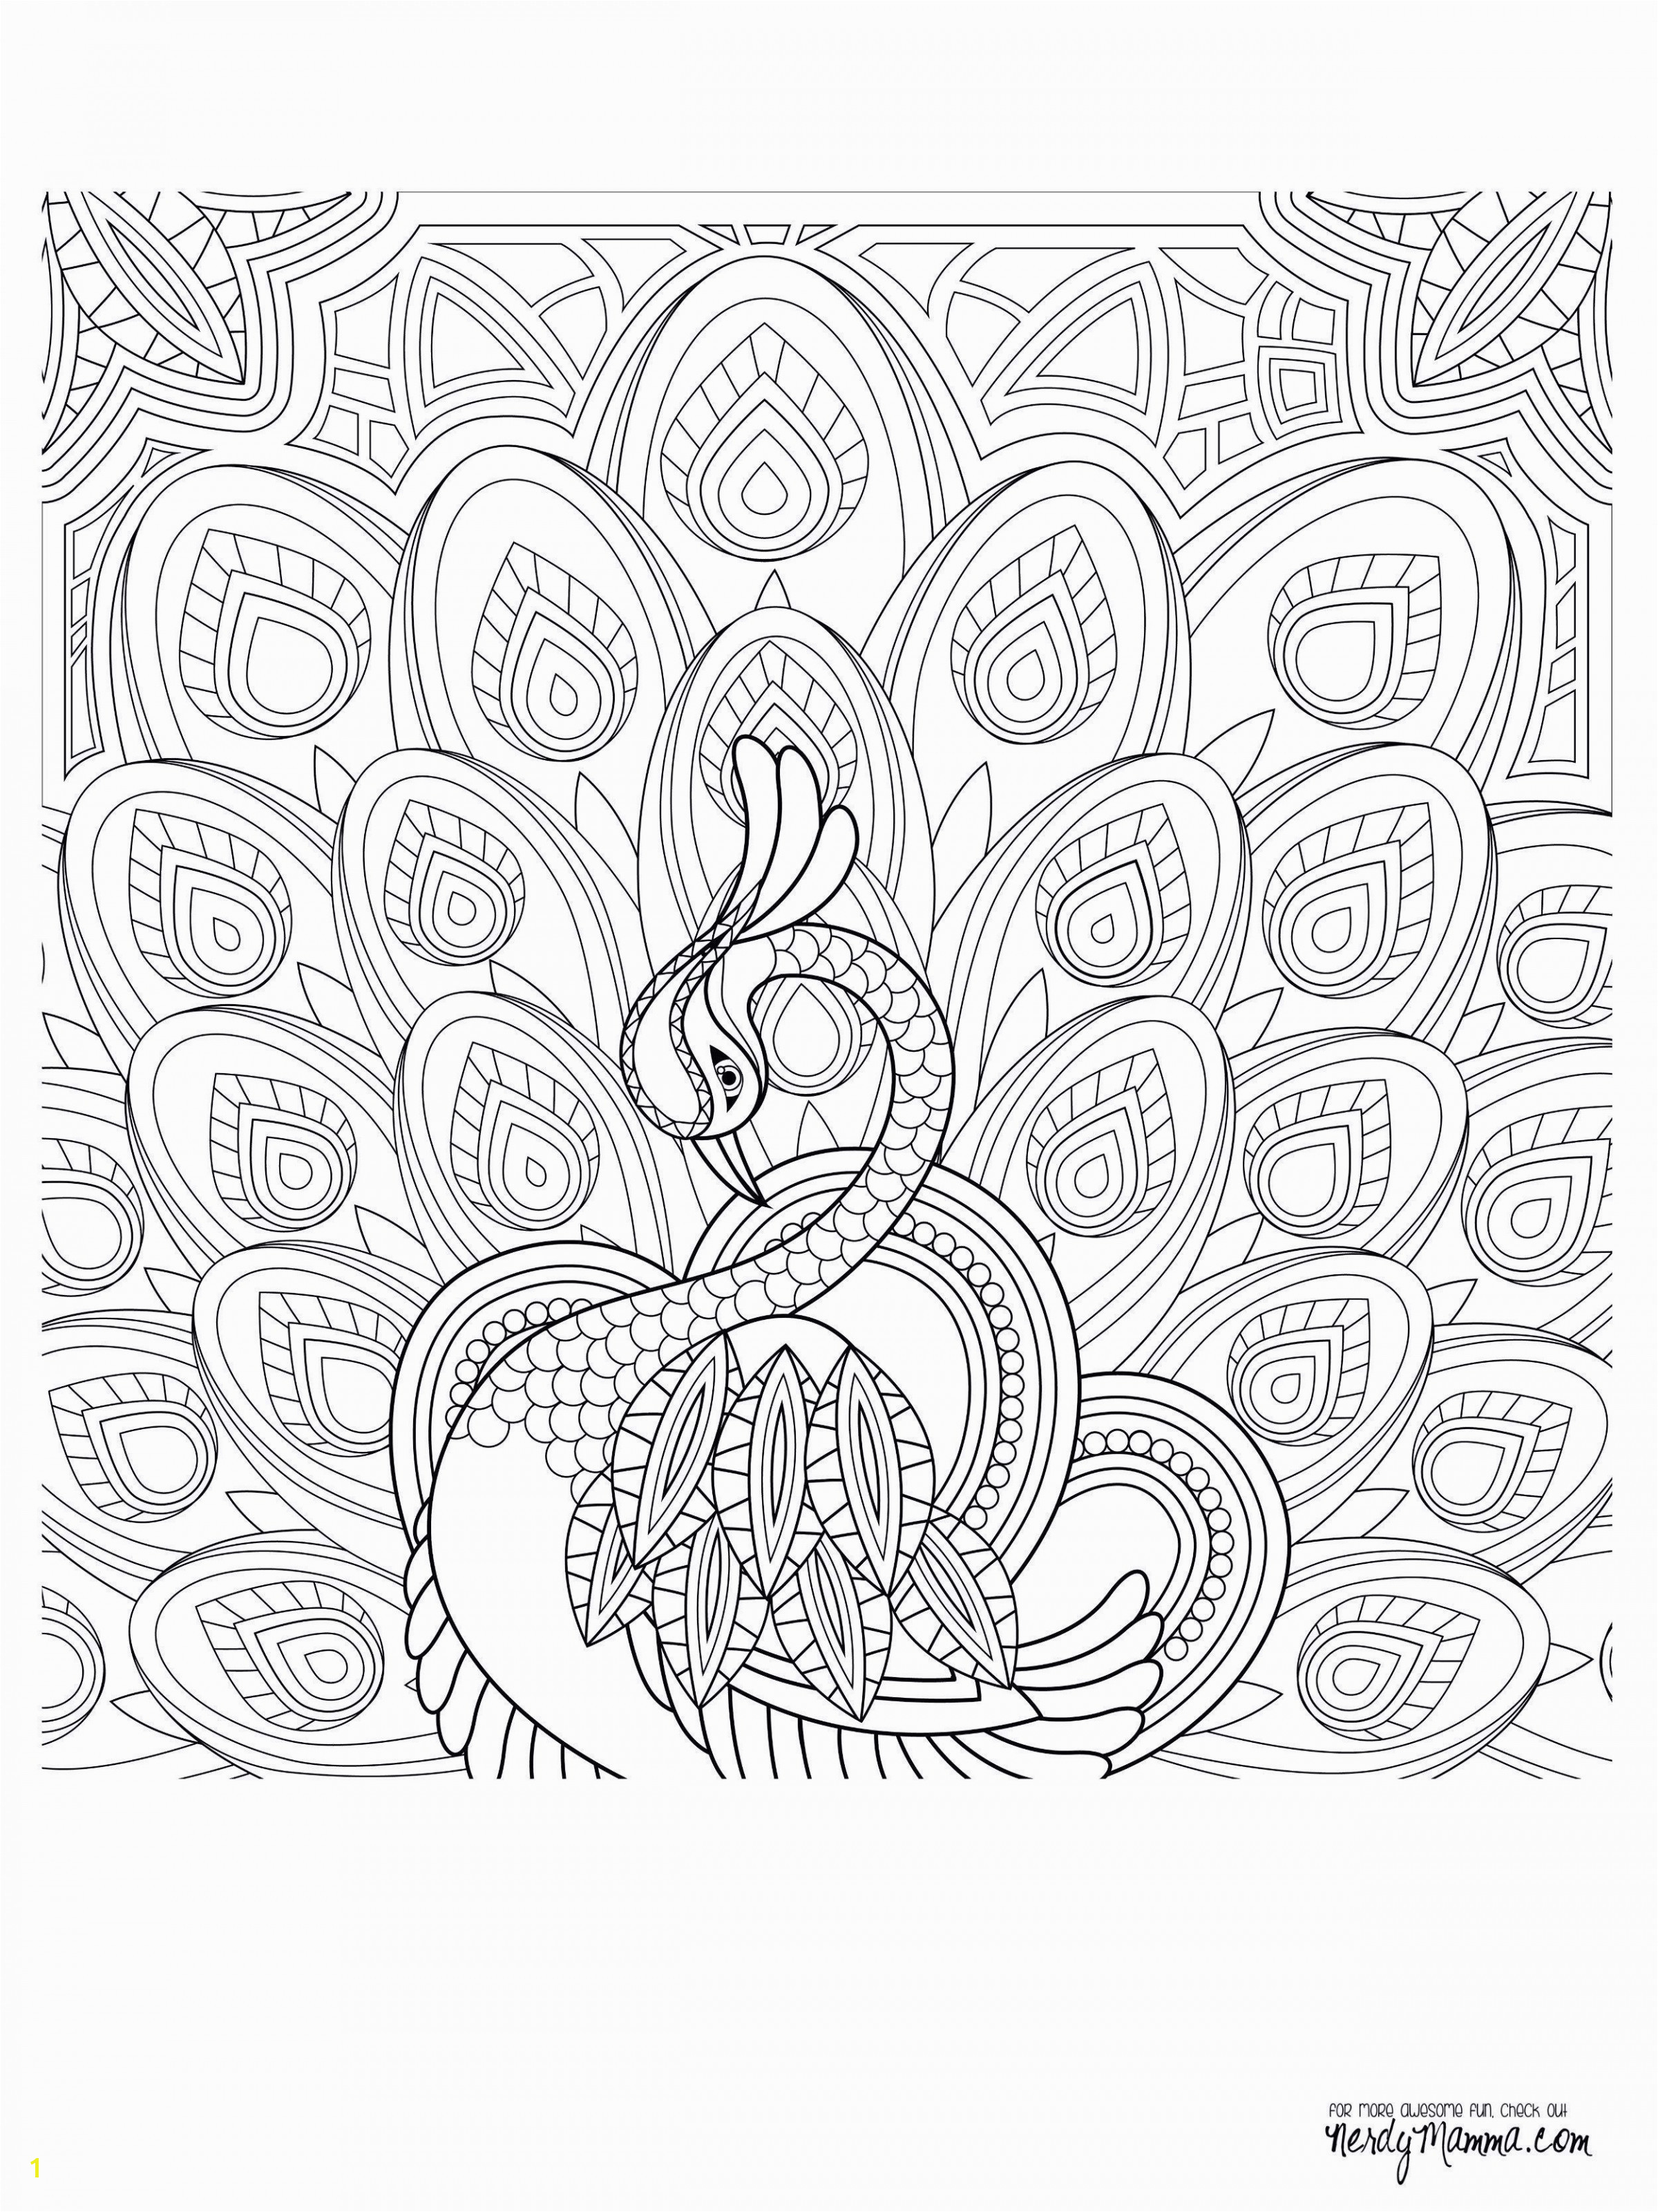 Coloring Pages for Weddings Wedding Coloring Pages Colouring Pages Mal Coloring Pages Fresh